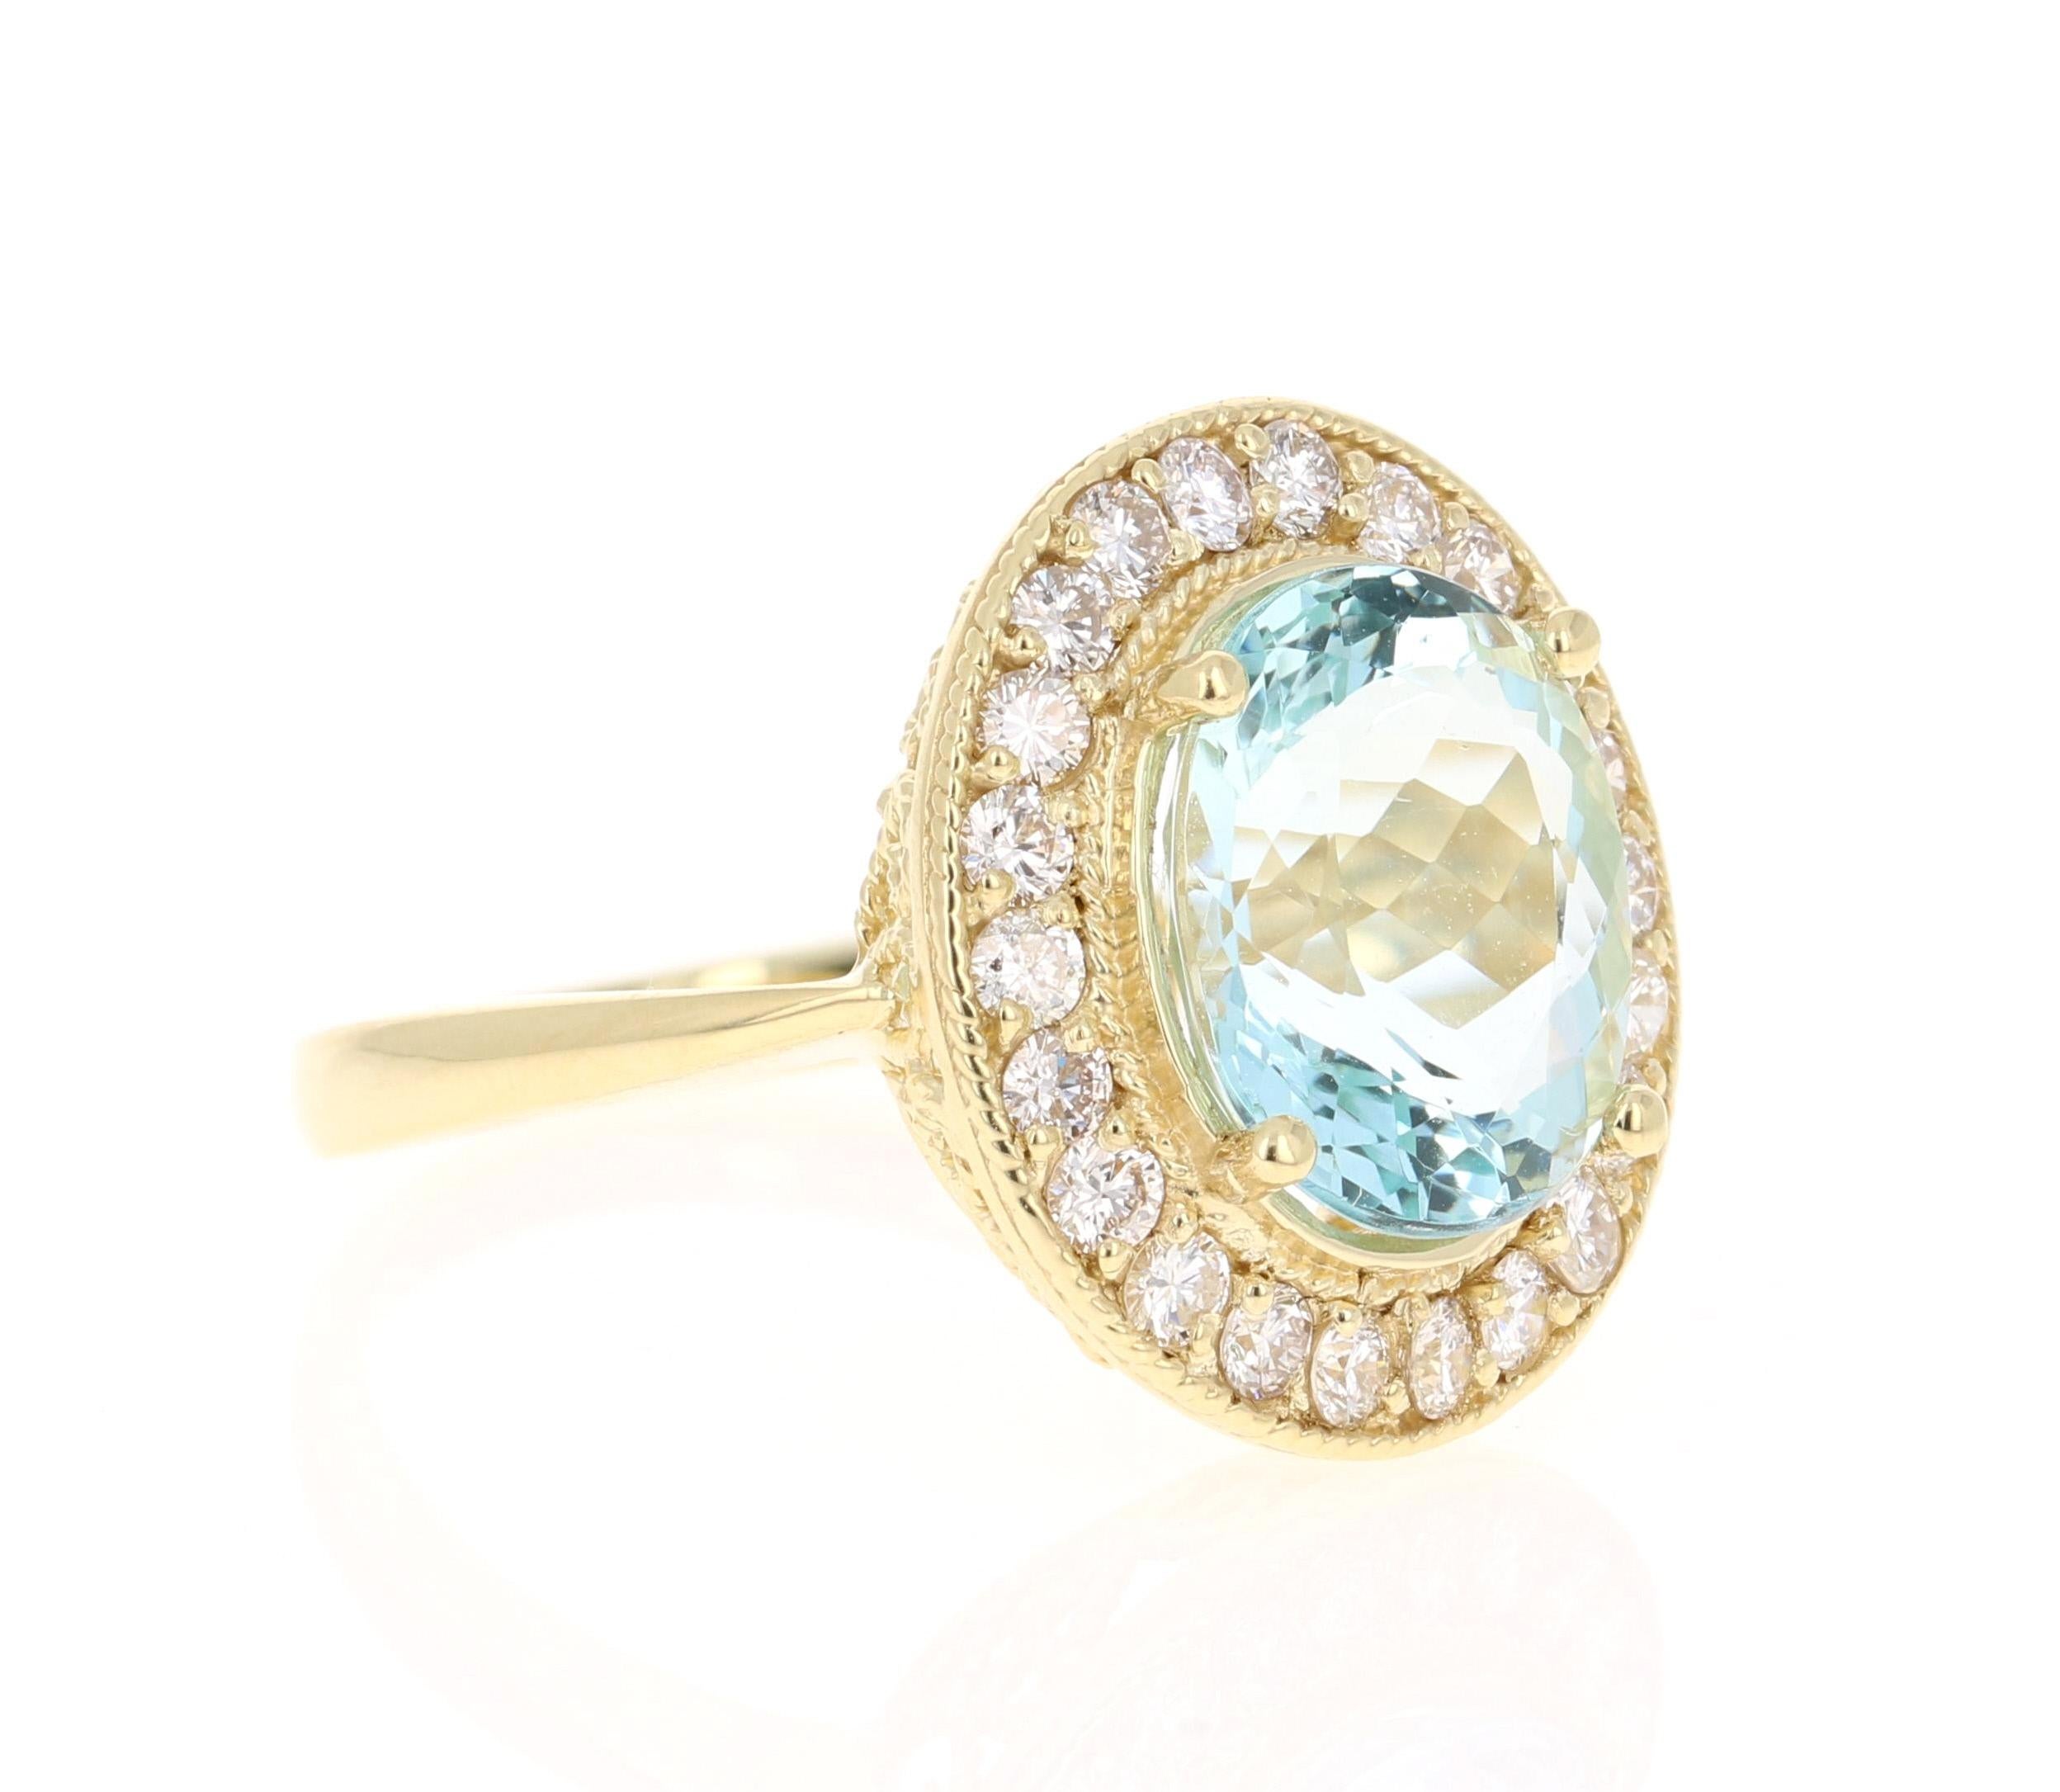 Stunning Victorian-Inspired Beauty! 
This ring has a beautiful 4.07 Carat Oval Cut Aquamarine and is surrounded by 22 Round Cut Diamonds that weigh 0.77 carat (Clarity: VS, Color: H). The total carat weight of this ring is 4.84 Carats. 

The Oval